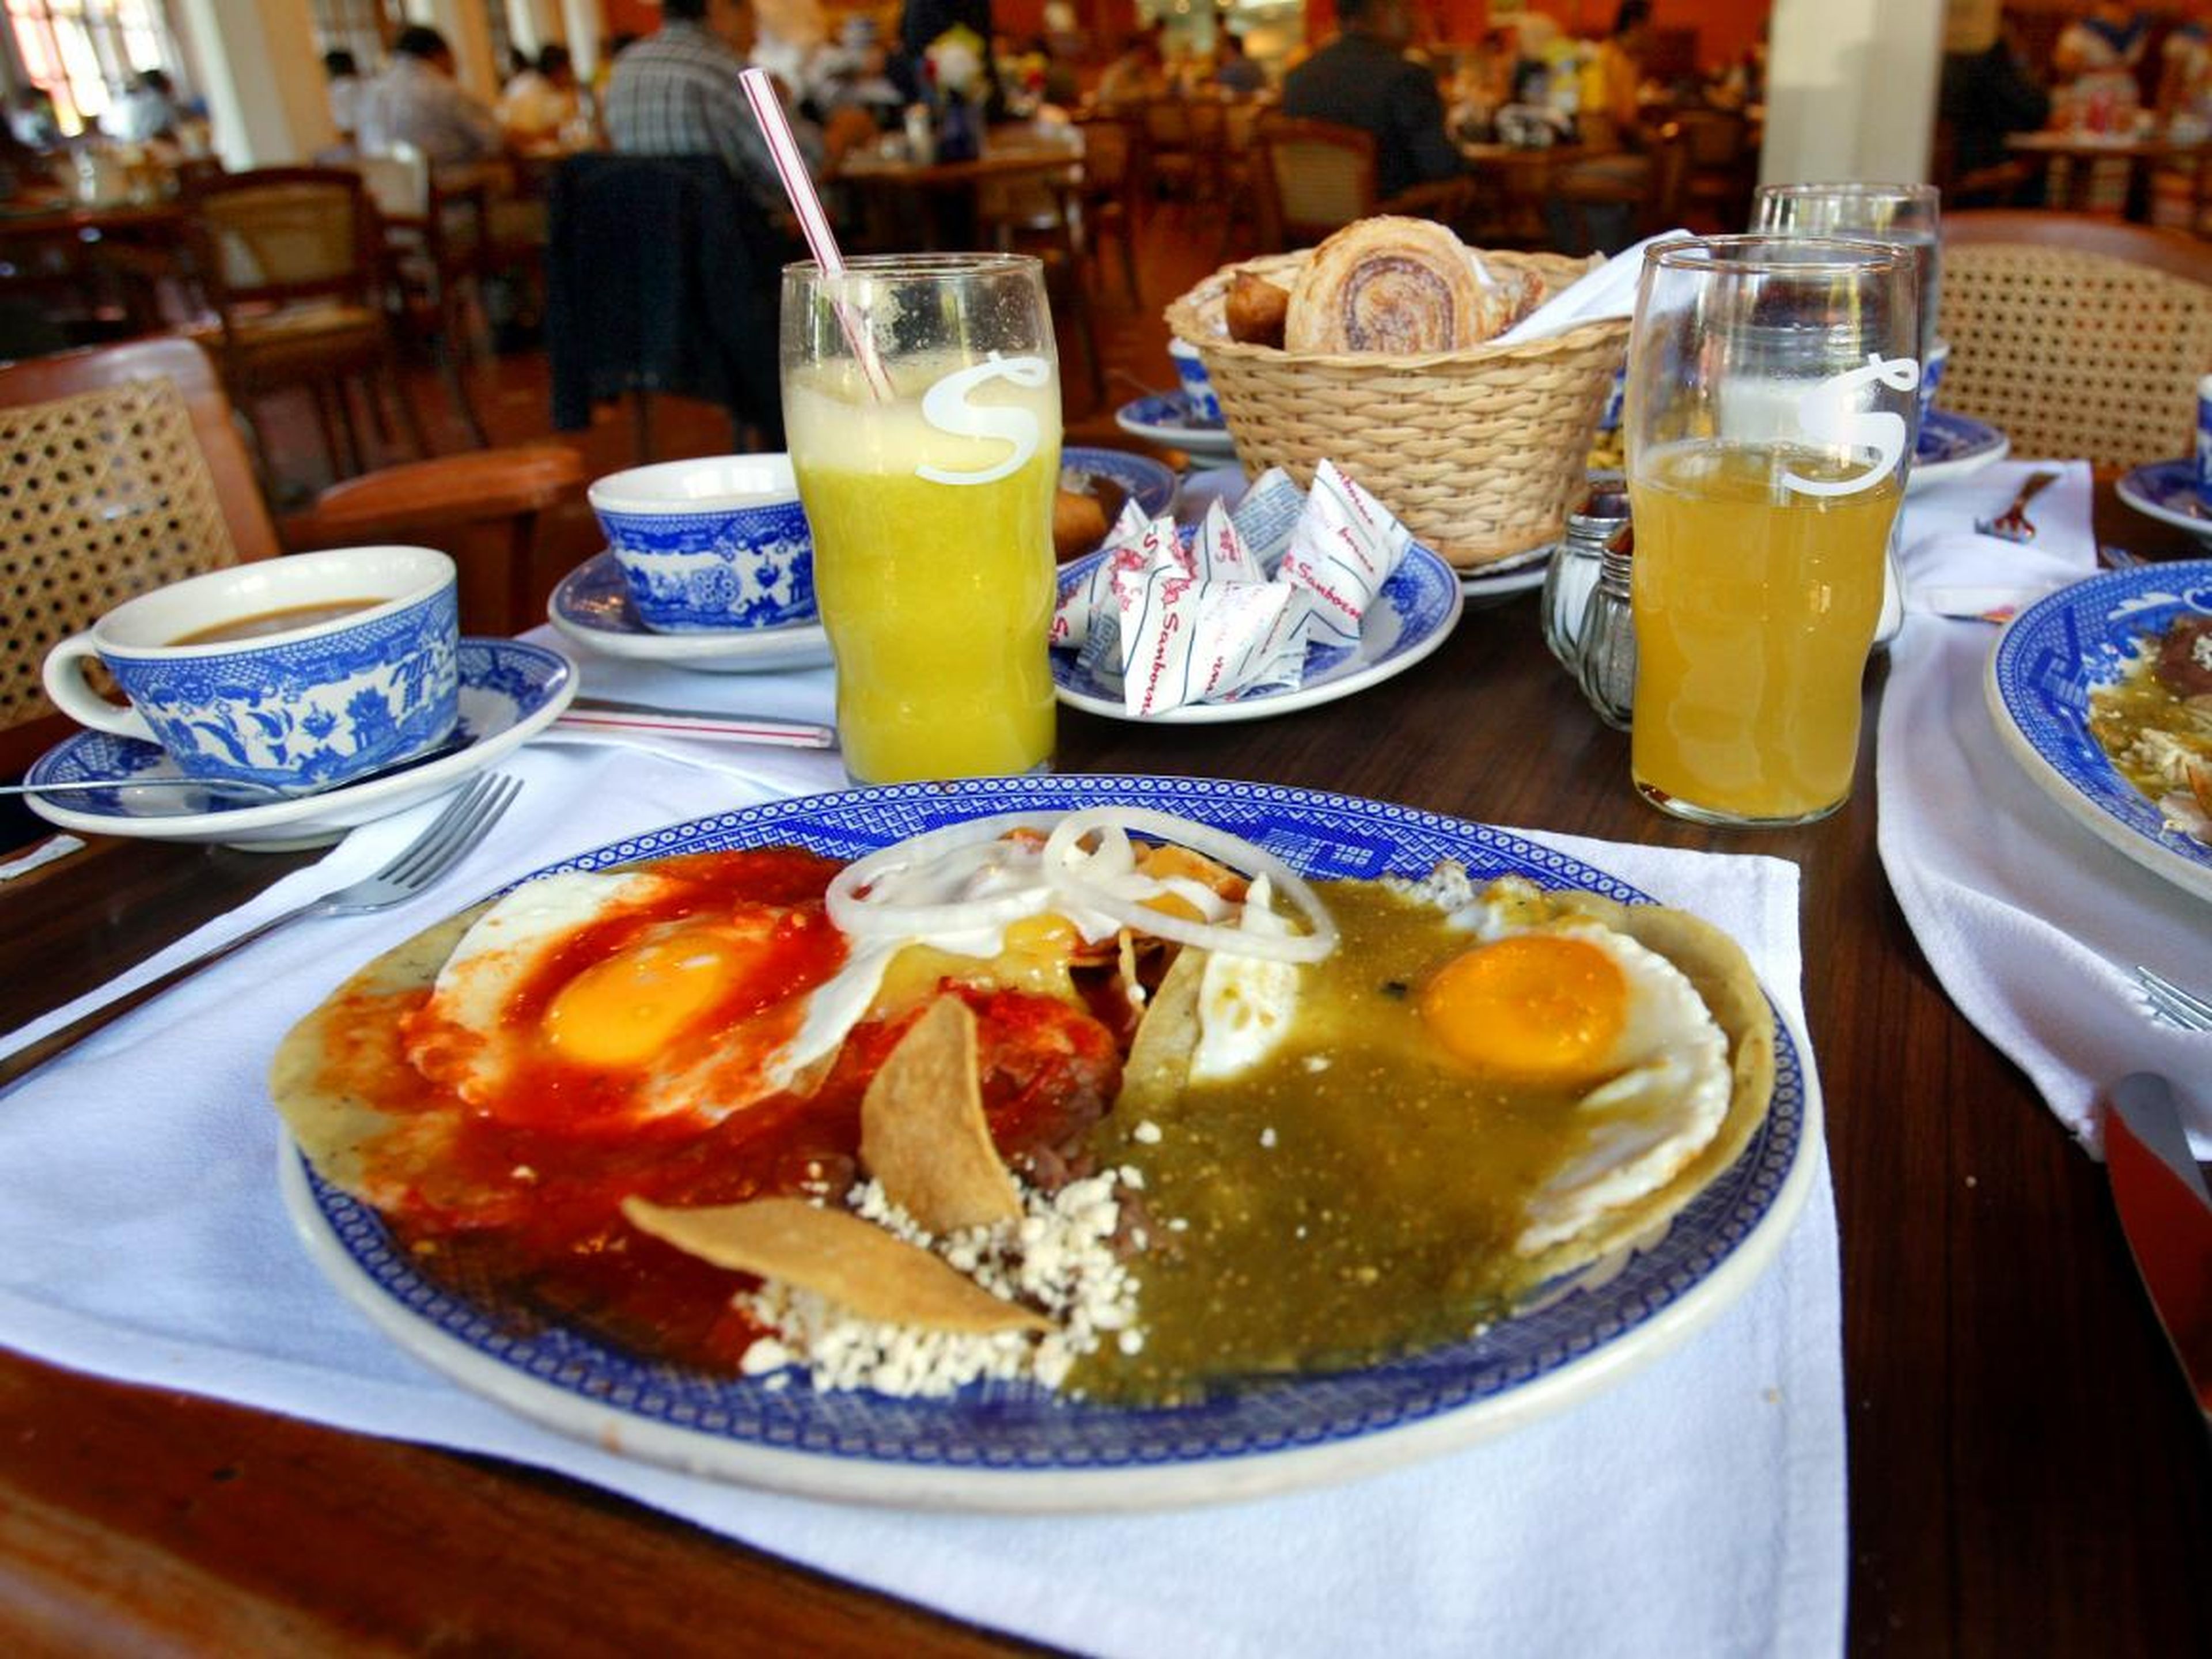 Anais is a Mexico City-born culinary tour guide and food blogger. According to this expert, one of the most popular breakfast dishes around is called chilaquiles — deep-fried tortillas soaked in a tomato- or tomatillo-based sauce,